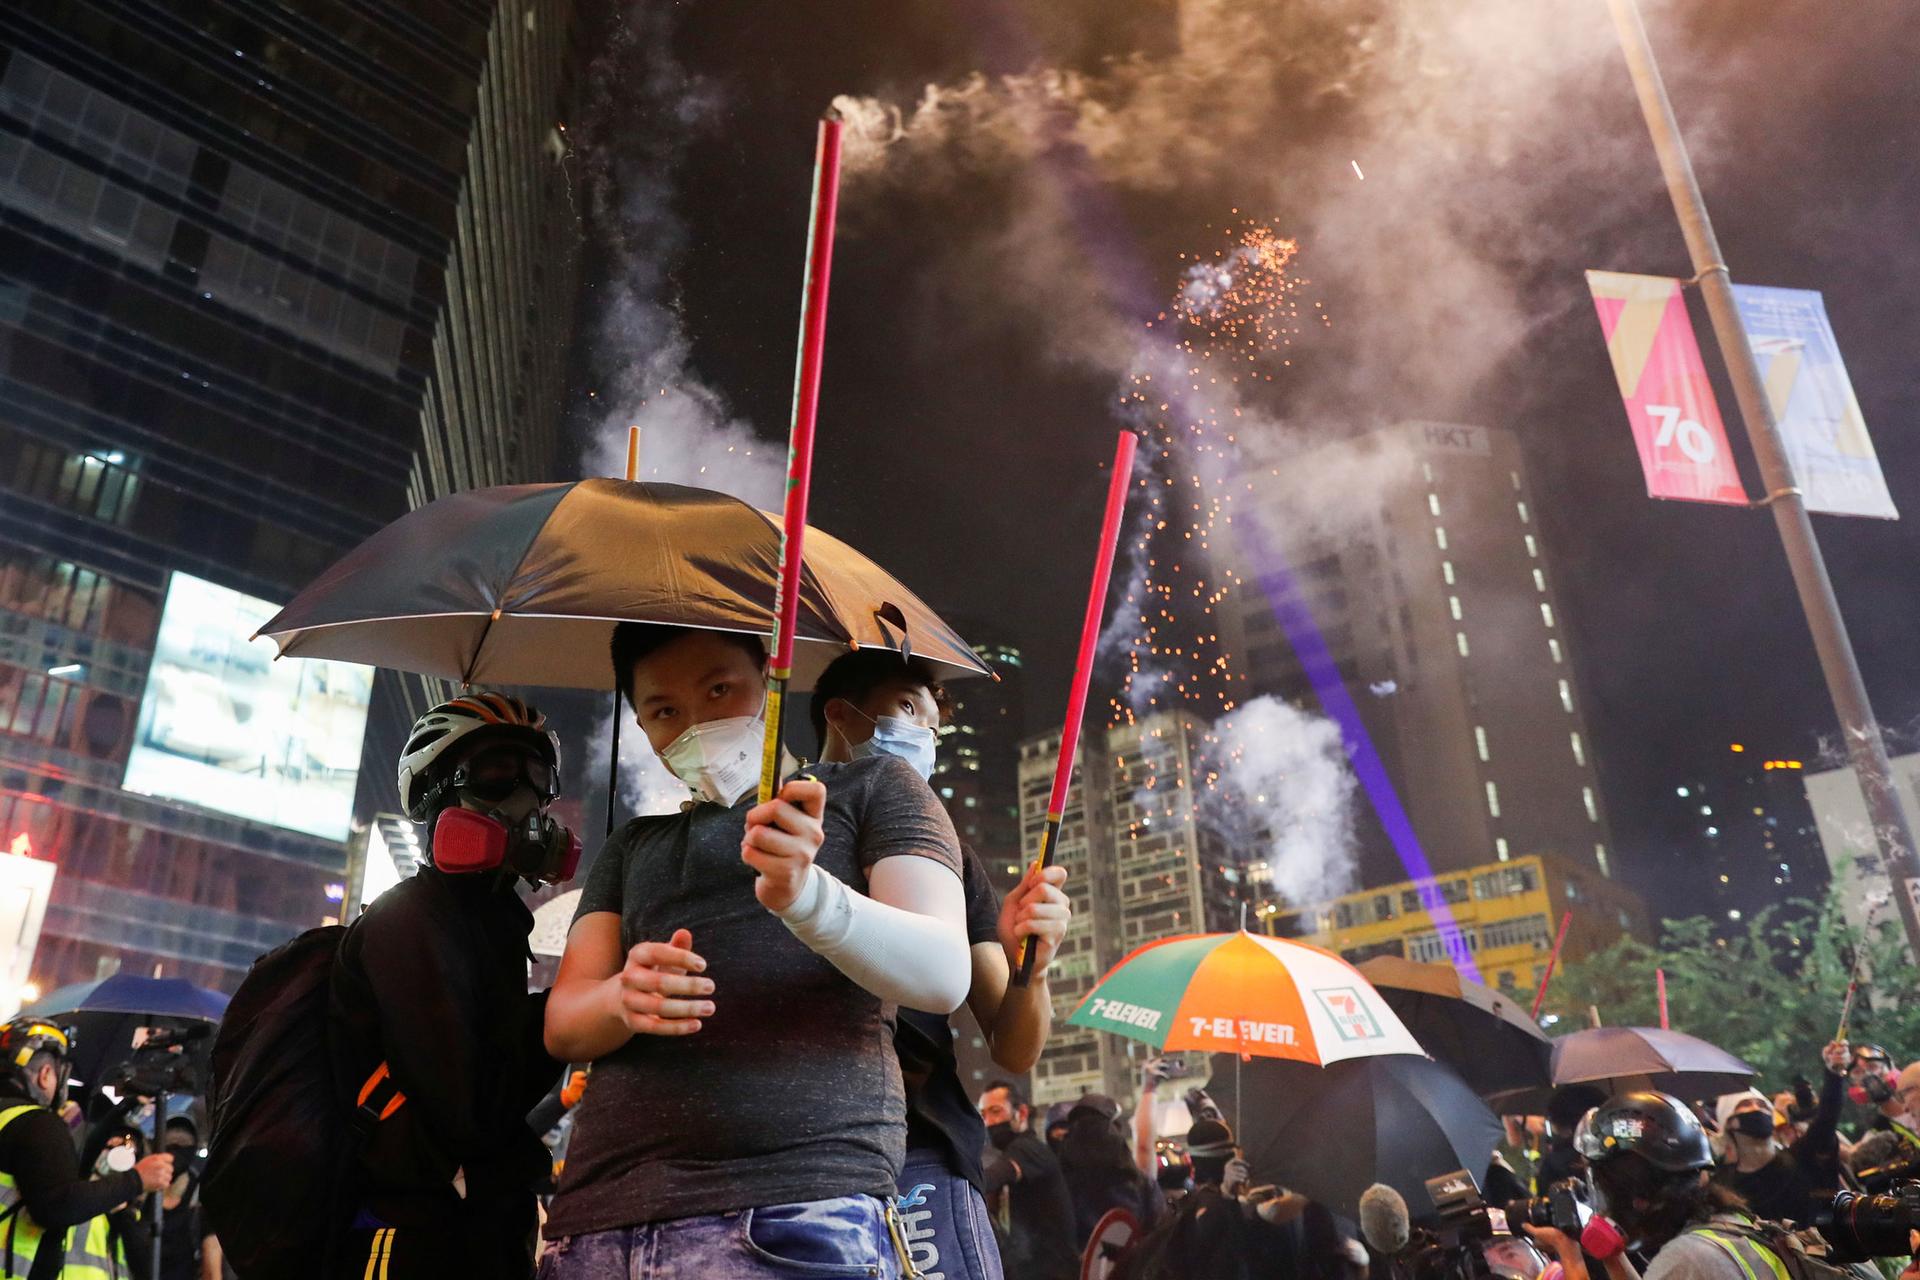 A group of protesters are shown with umbrellas and holding fireworks.